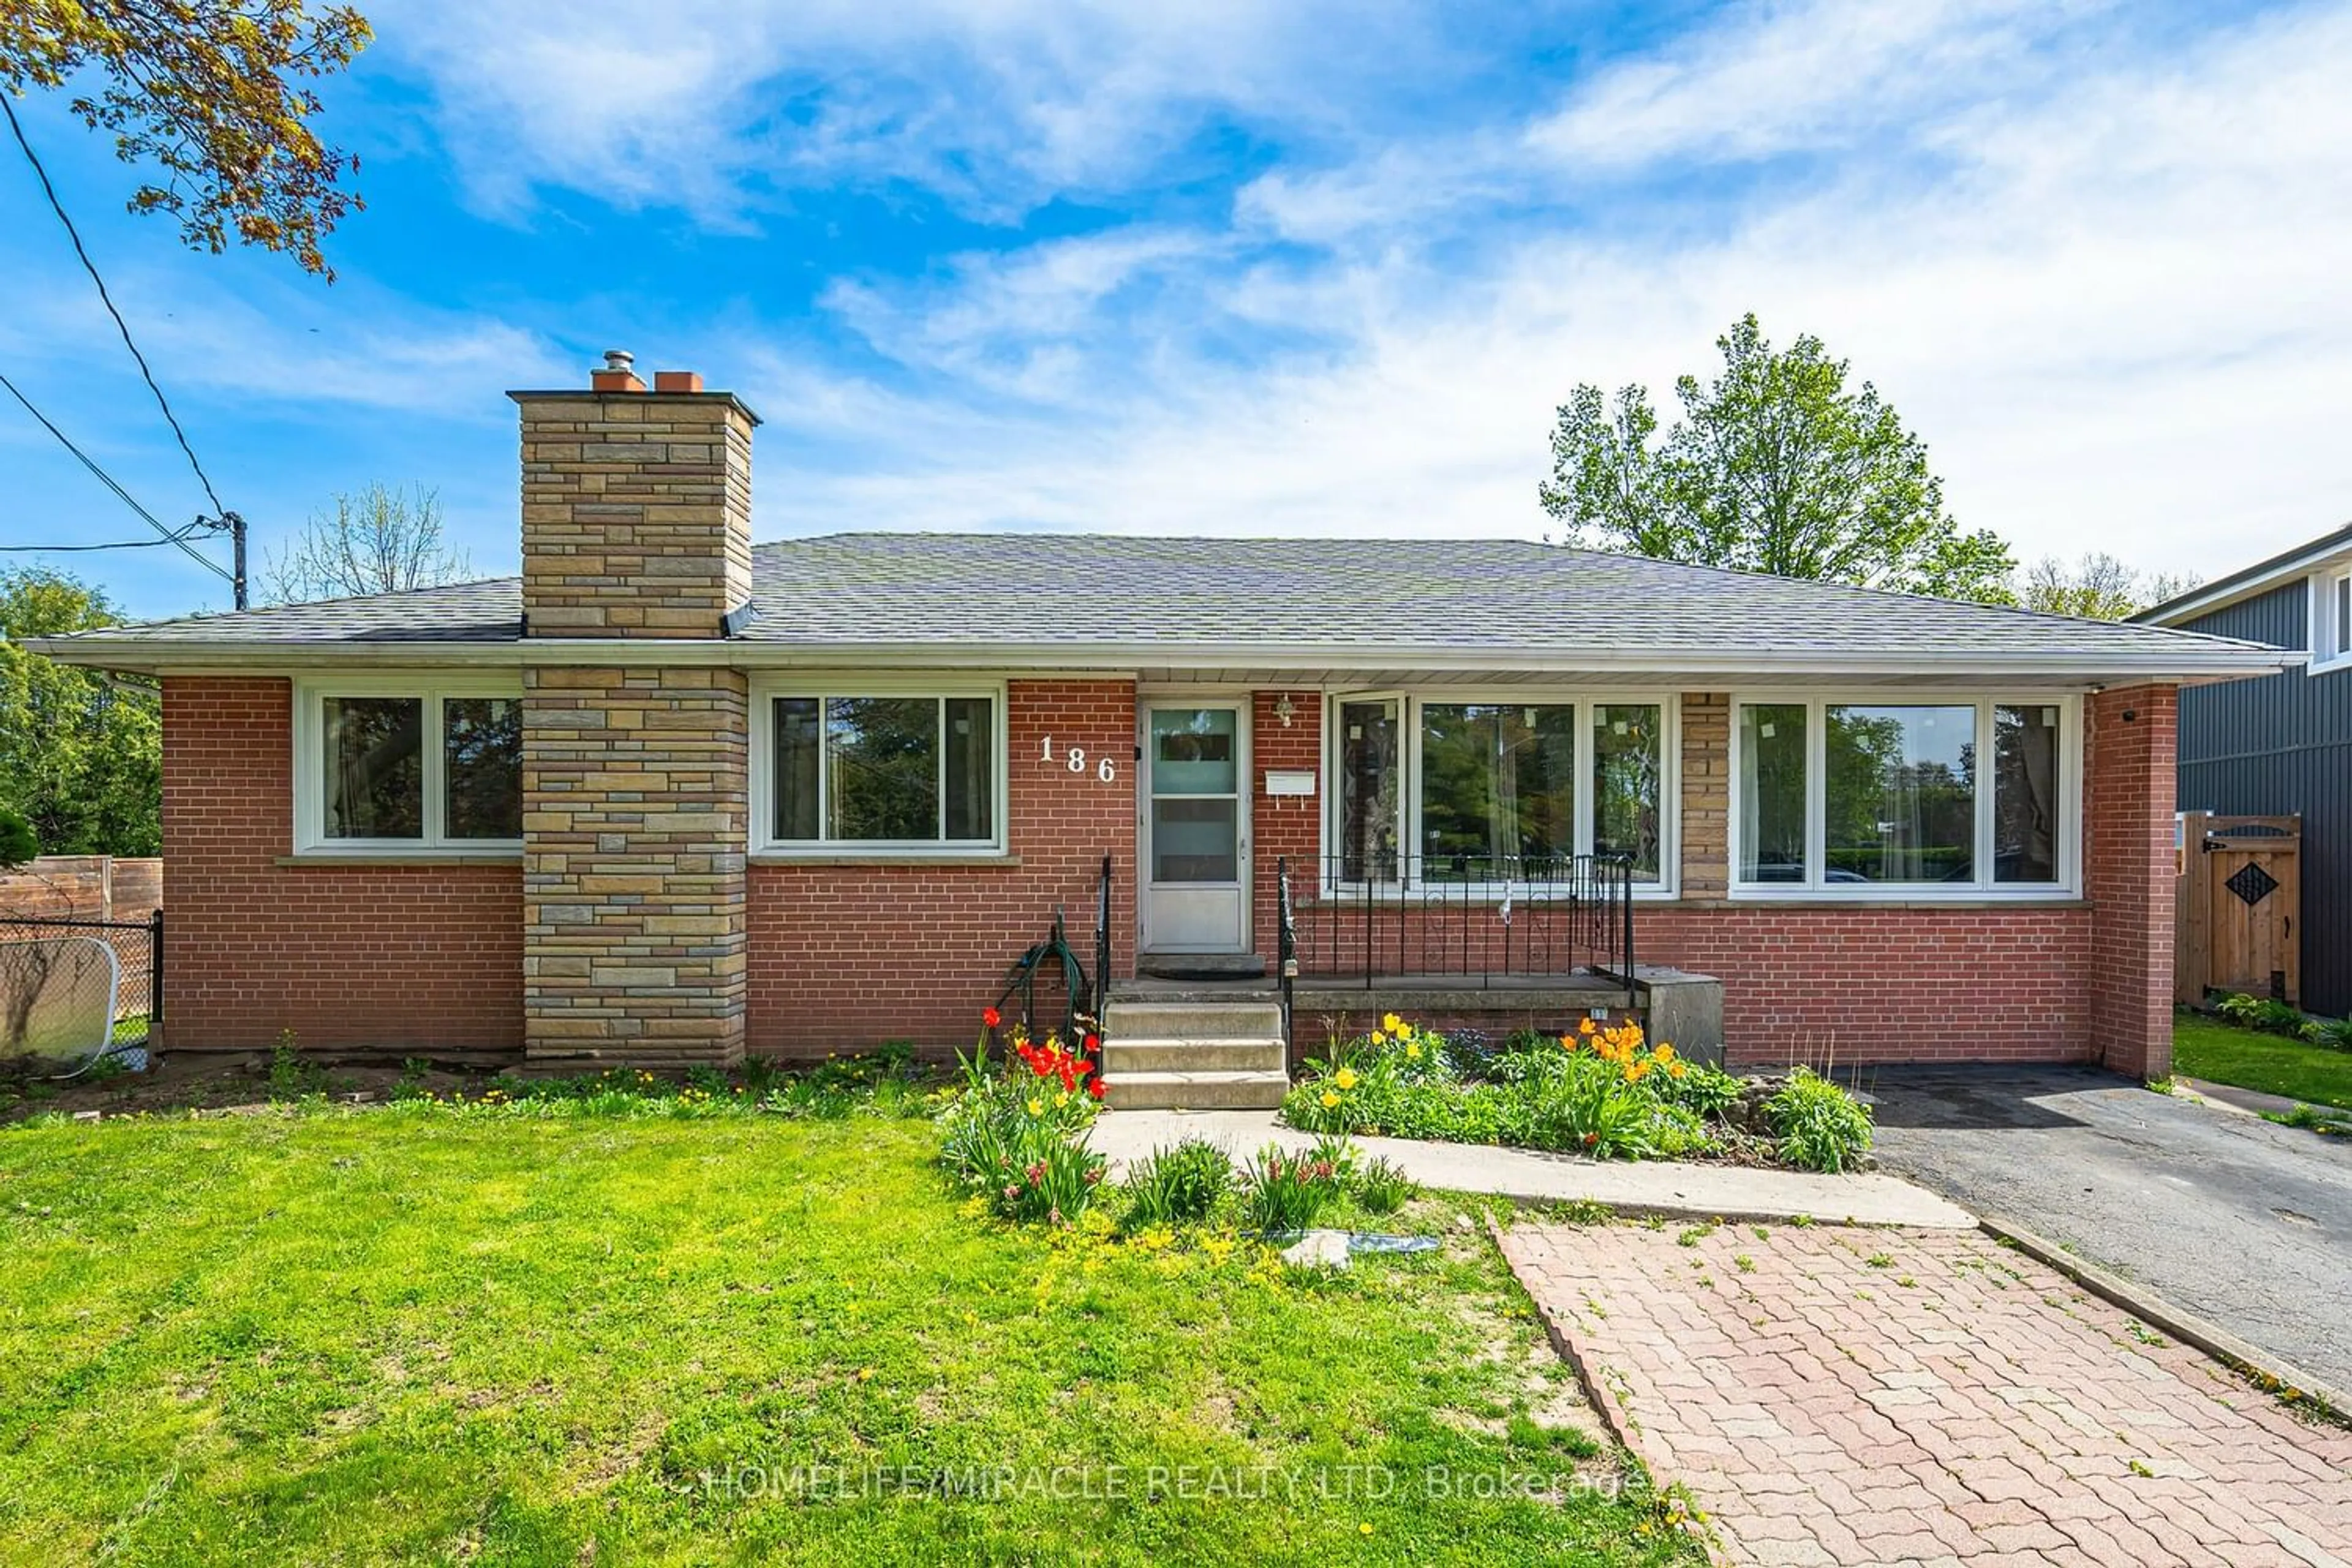 Home with brick exterior material for 186 Wakefield Rd, Milton Ontario L9T 2L9